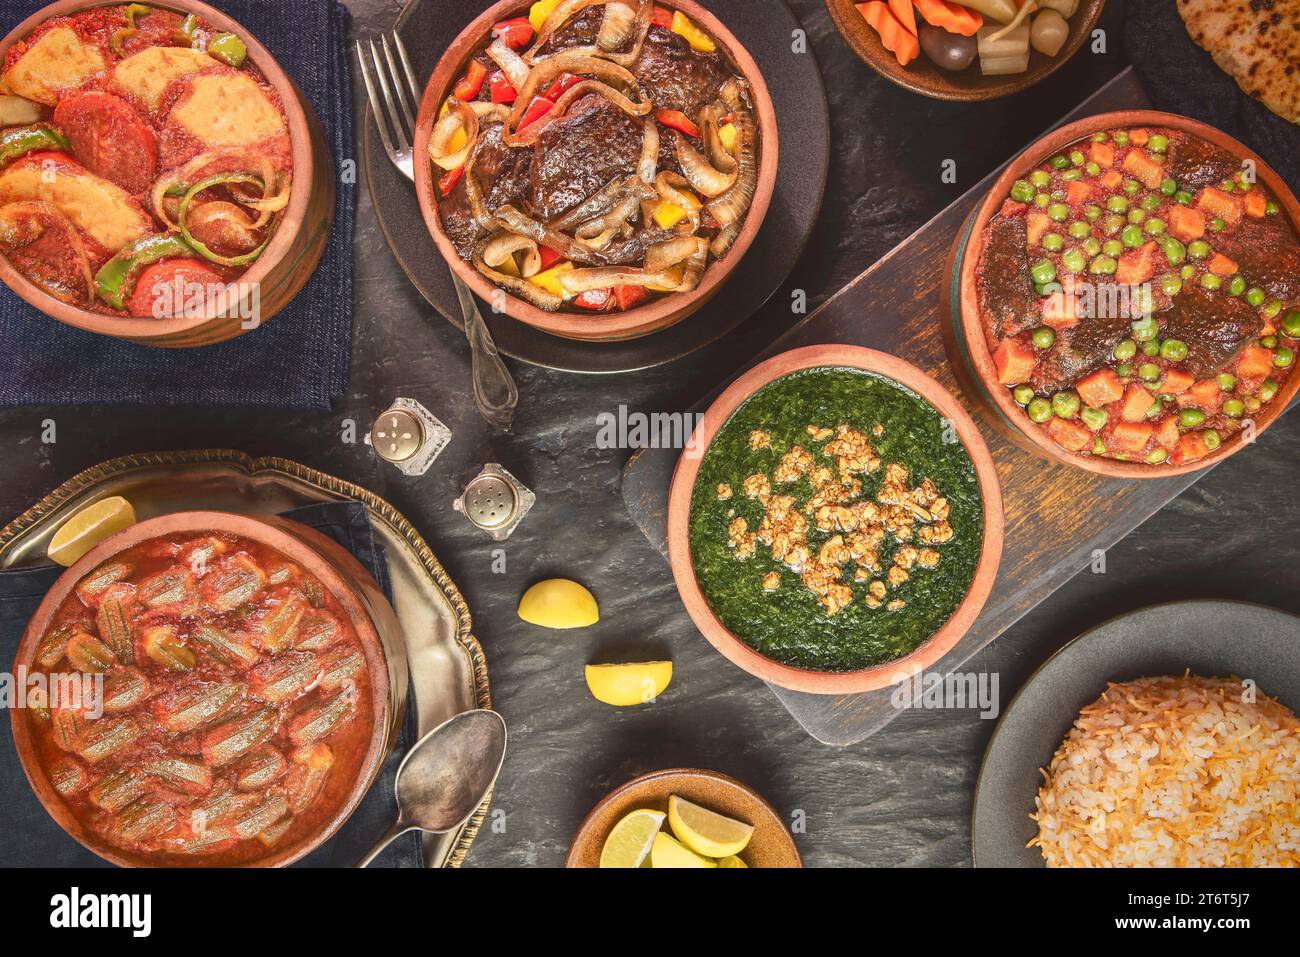 Arabic Cuisine; A variety of Middle Eastern traditional tagines such as potatoes, okra, peas, meat and molokhiya. Served with vermicelli rice. Stock Photo